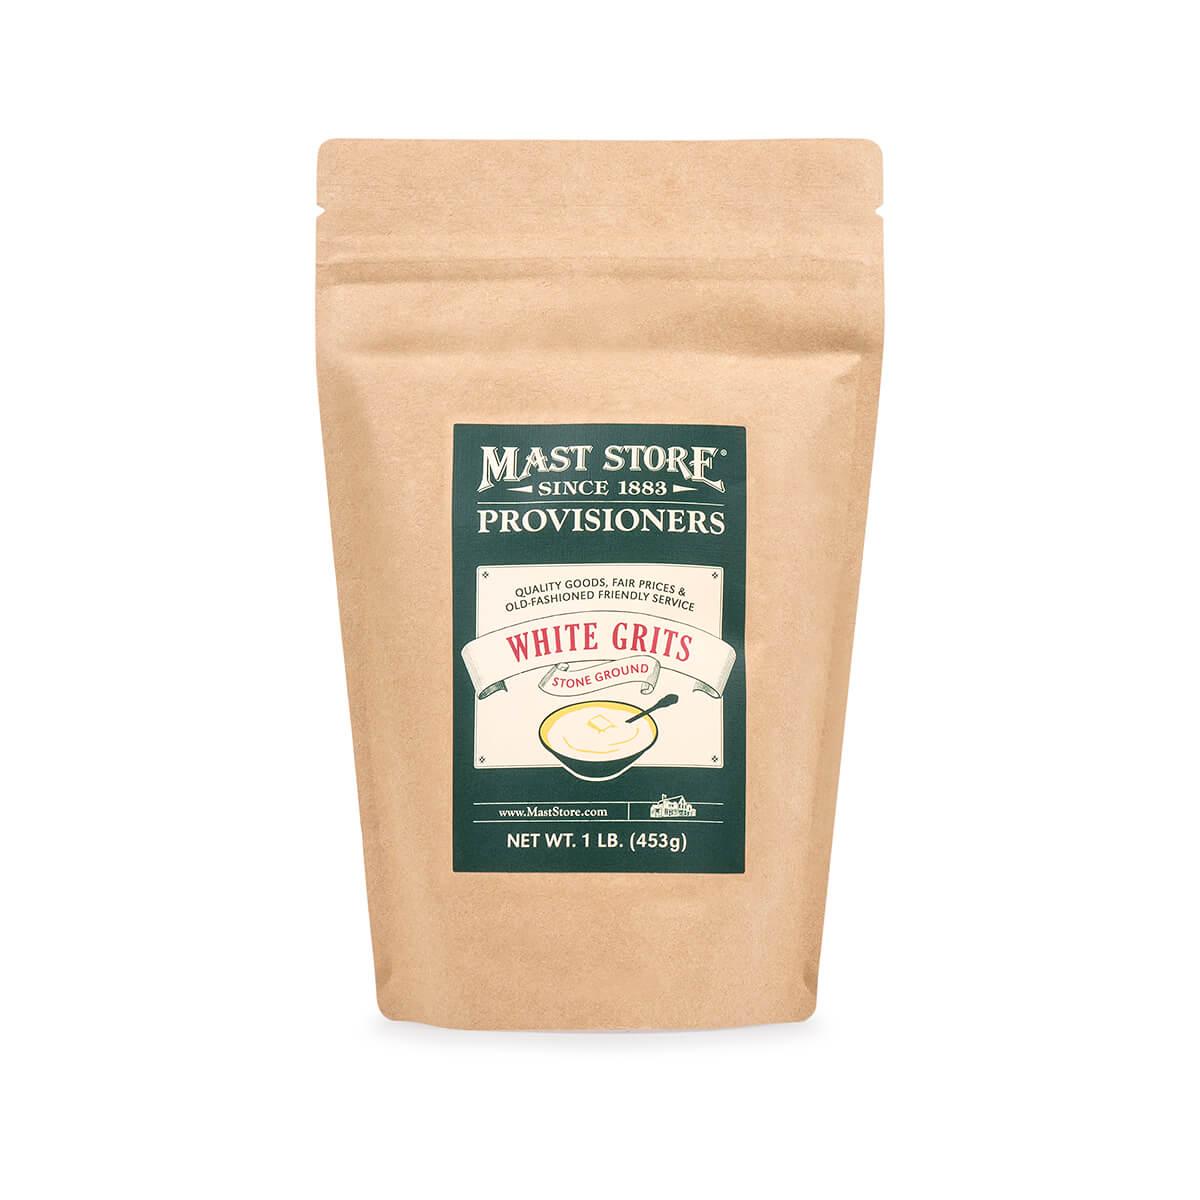  Mast Store Provisioners White Grits